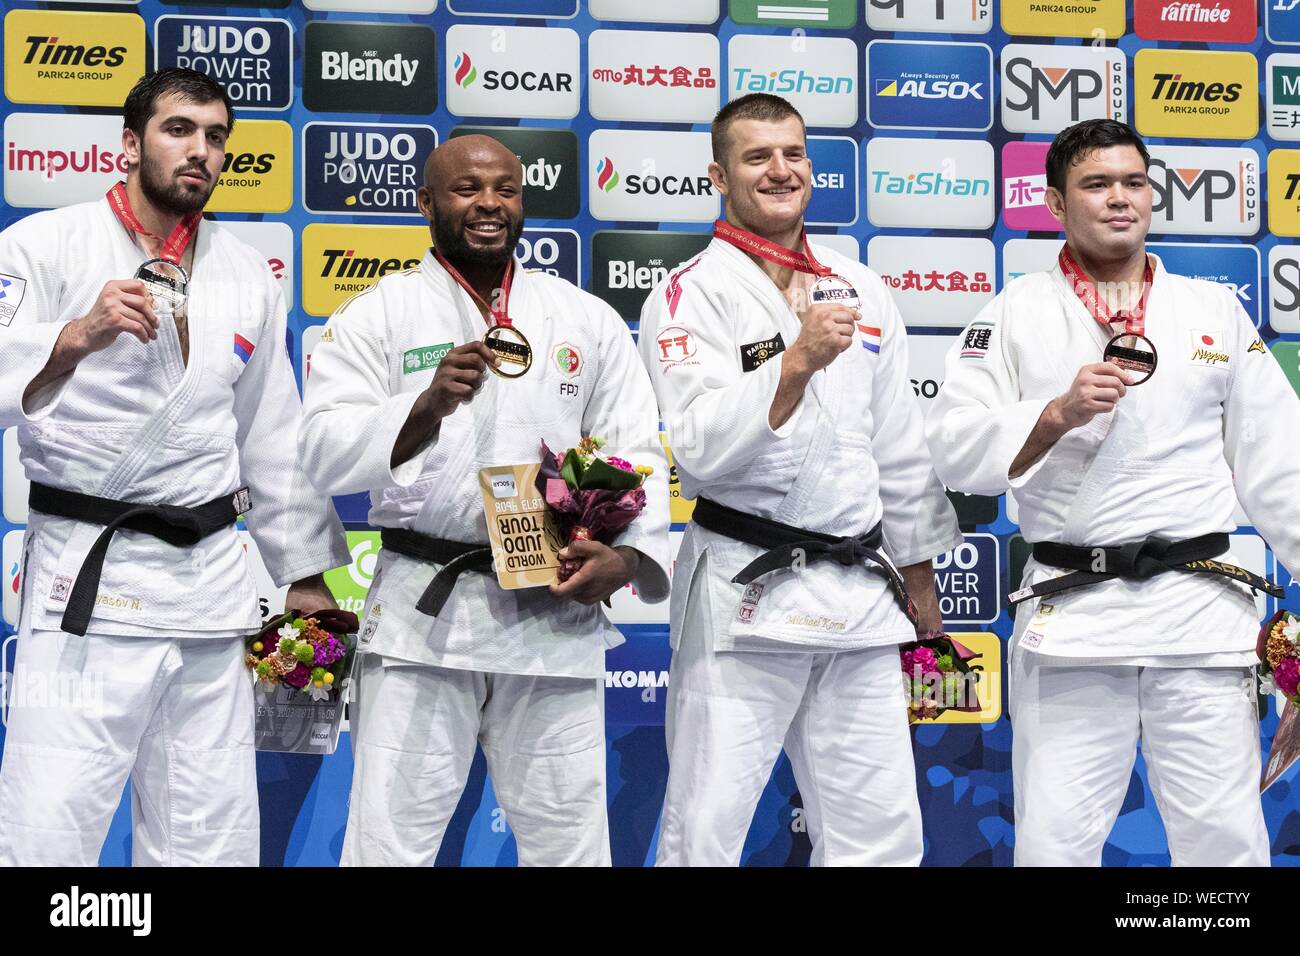 Tokyo, Japan. 30th Aug, 2019. (L to R) Silver medalist Niyaz Ilyasov, gol medalist Jorge Fonseca of Portugal, bronze medalists Michael Korrel of the Netherlands and Aaron Wolf of Japan, pose for the cameras during the award ceremony of the men's -100kg category at World Judo Championships Tokyo 2019 in the Nippon Budokan. The World Judo Championships Tokyo 2019 is held from August 25 to September 1st. Credit: Rodrigo Reyes Marin/ZUMA Wire/Alamy Live News Stock Photo